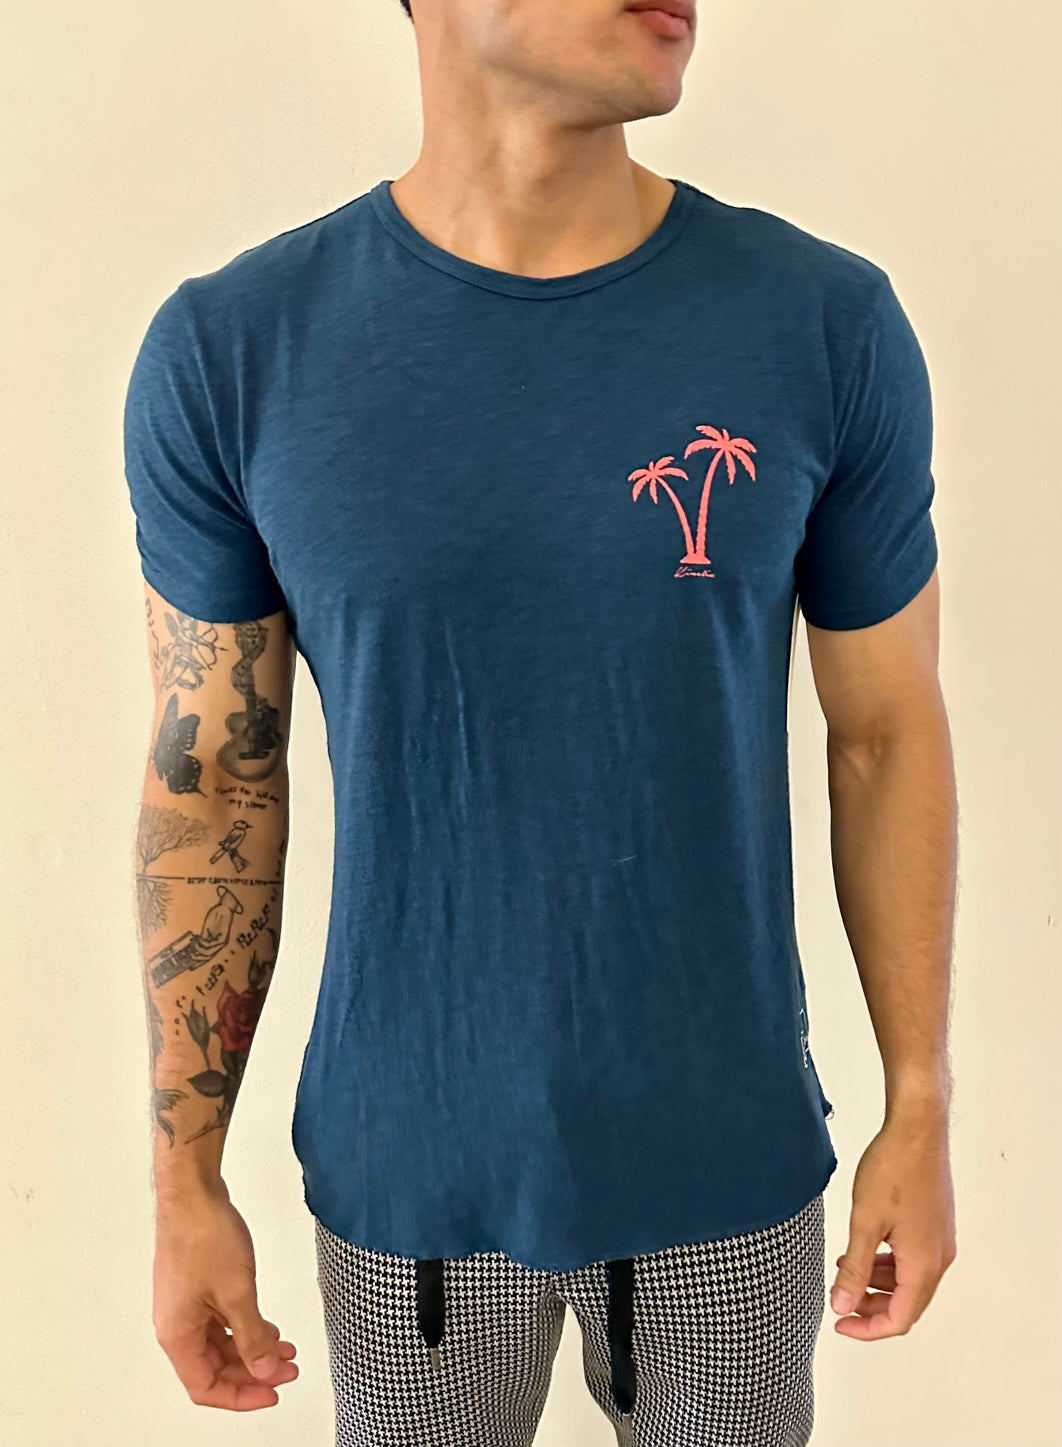 Twin Palms on our 4 Corners Crew neck (Navy)